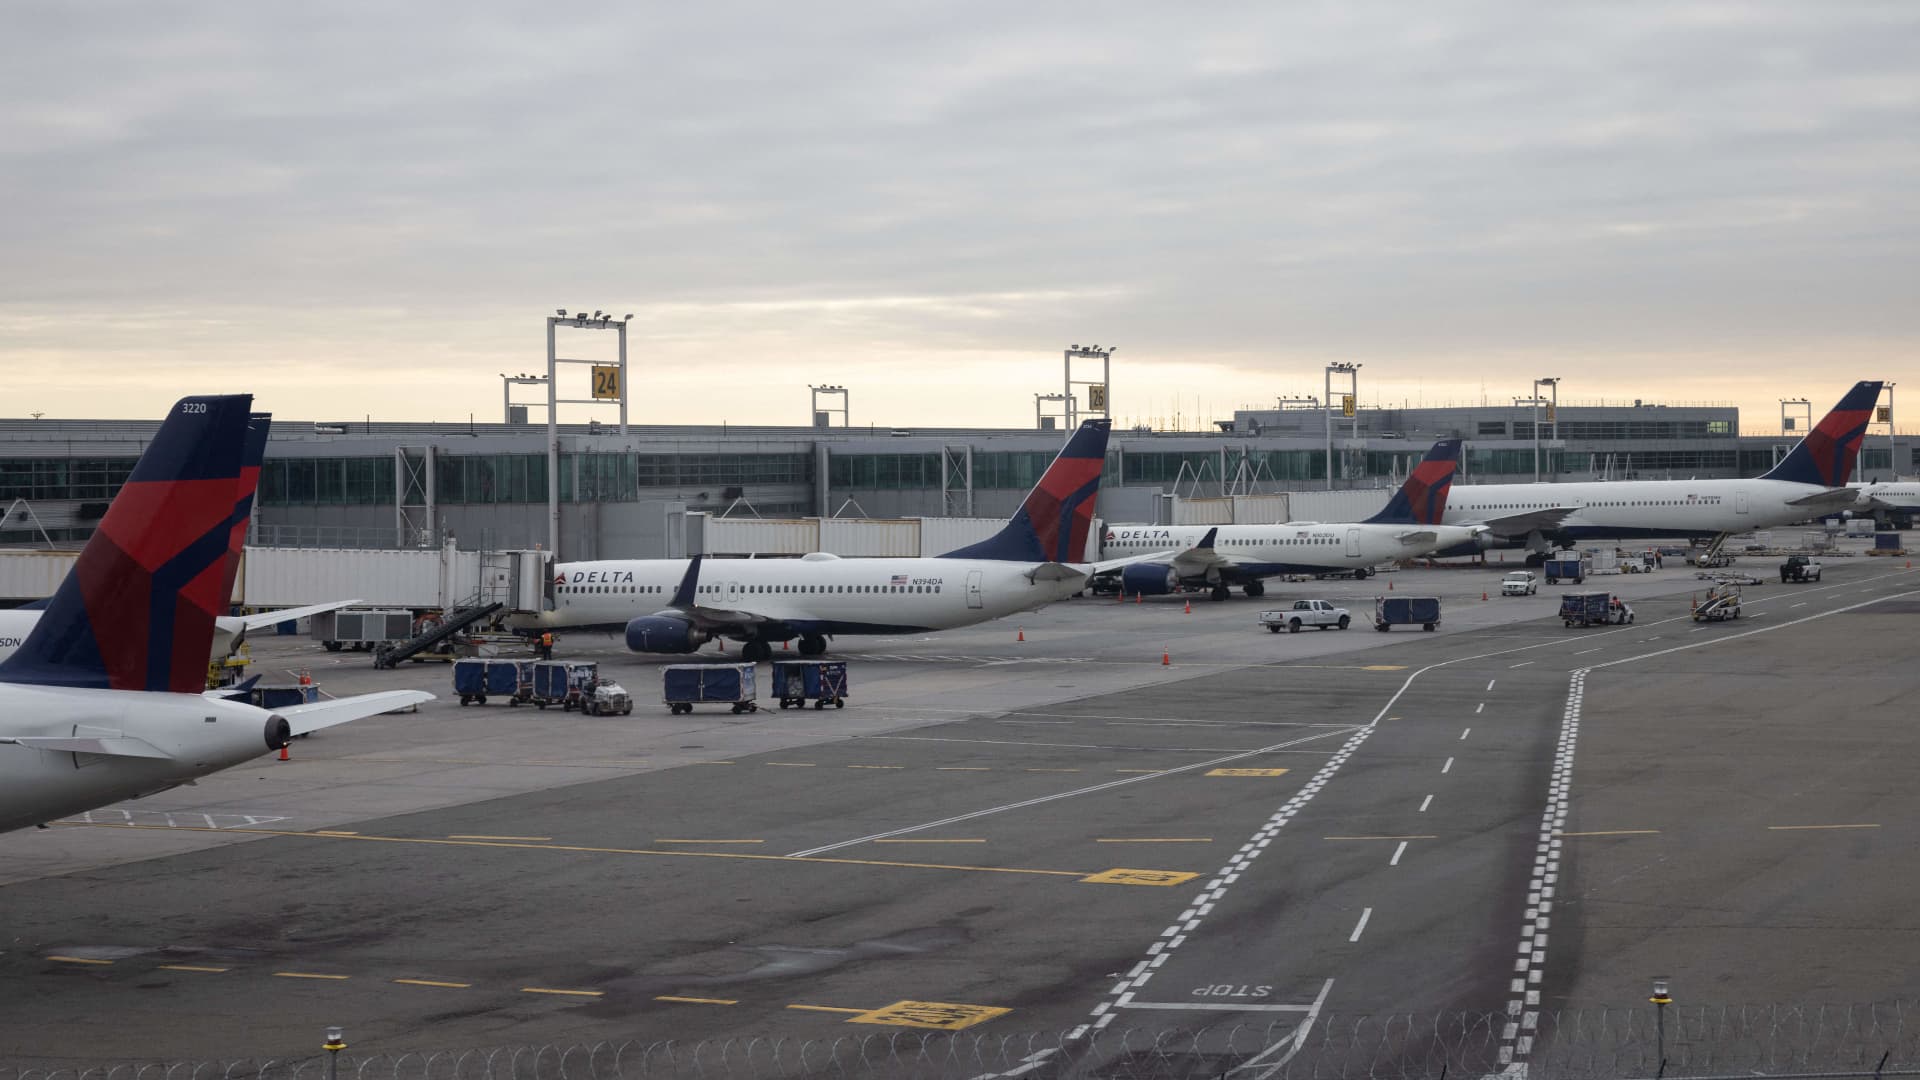 FAA launches investigation after two planes practically collide at JFK airport